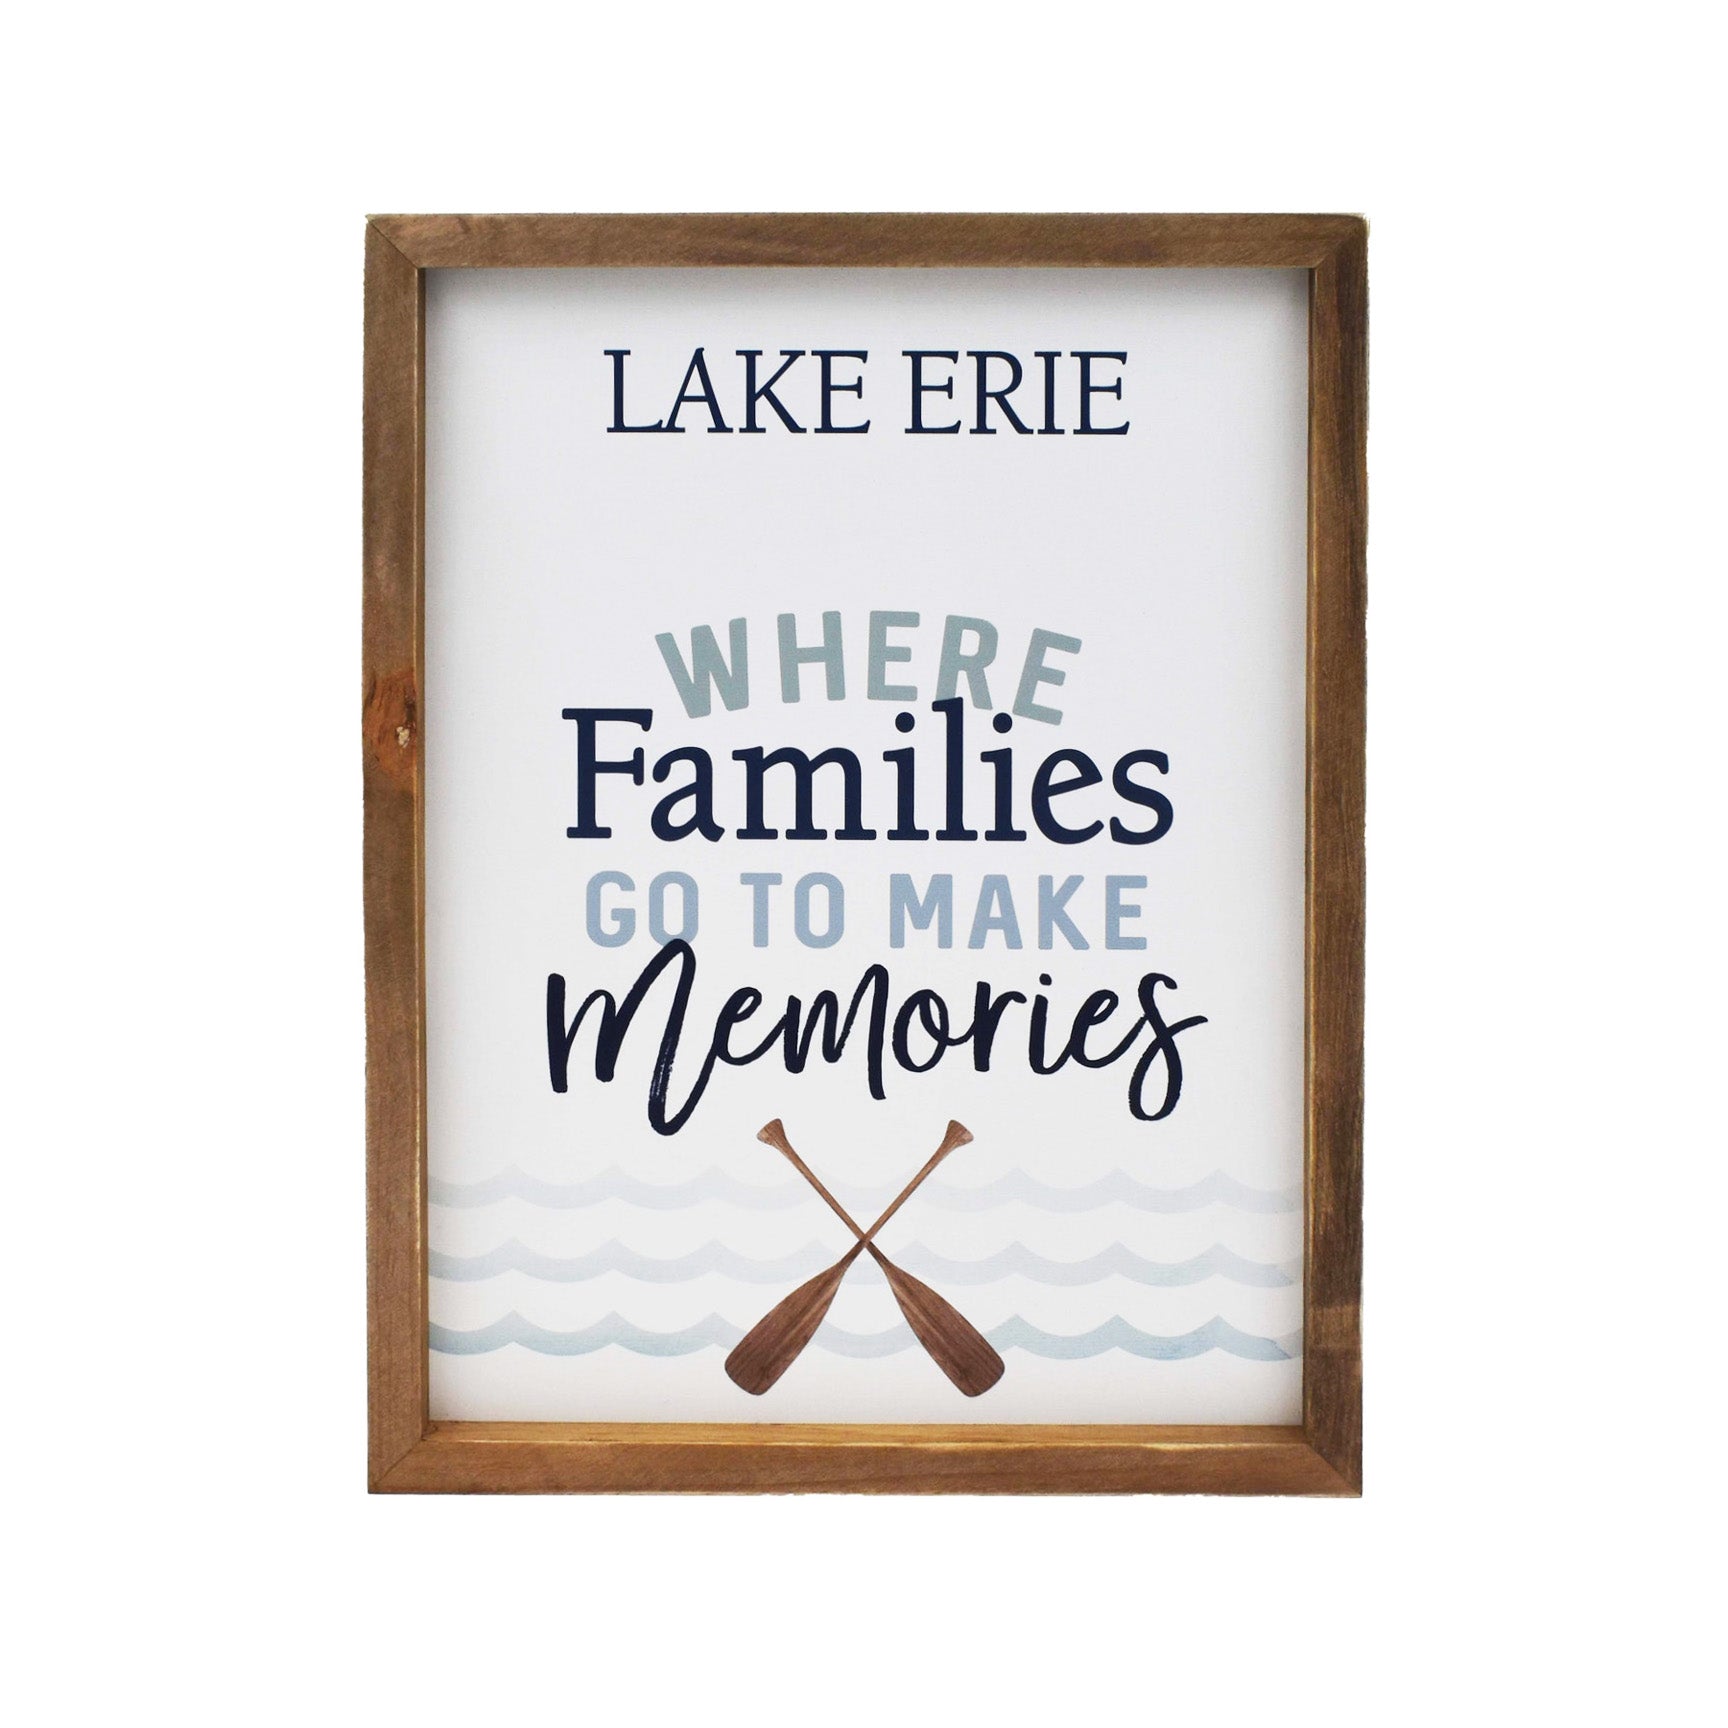 "Lake Erie, Where Families Go to Make Memories" Wooden Sign